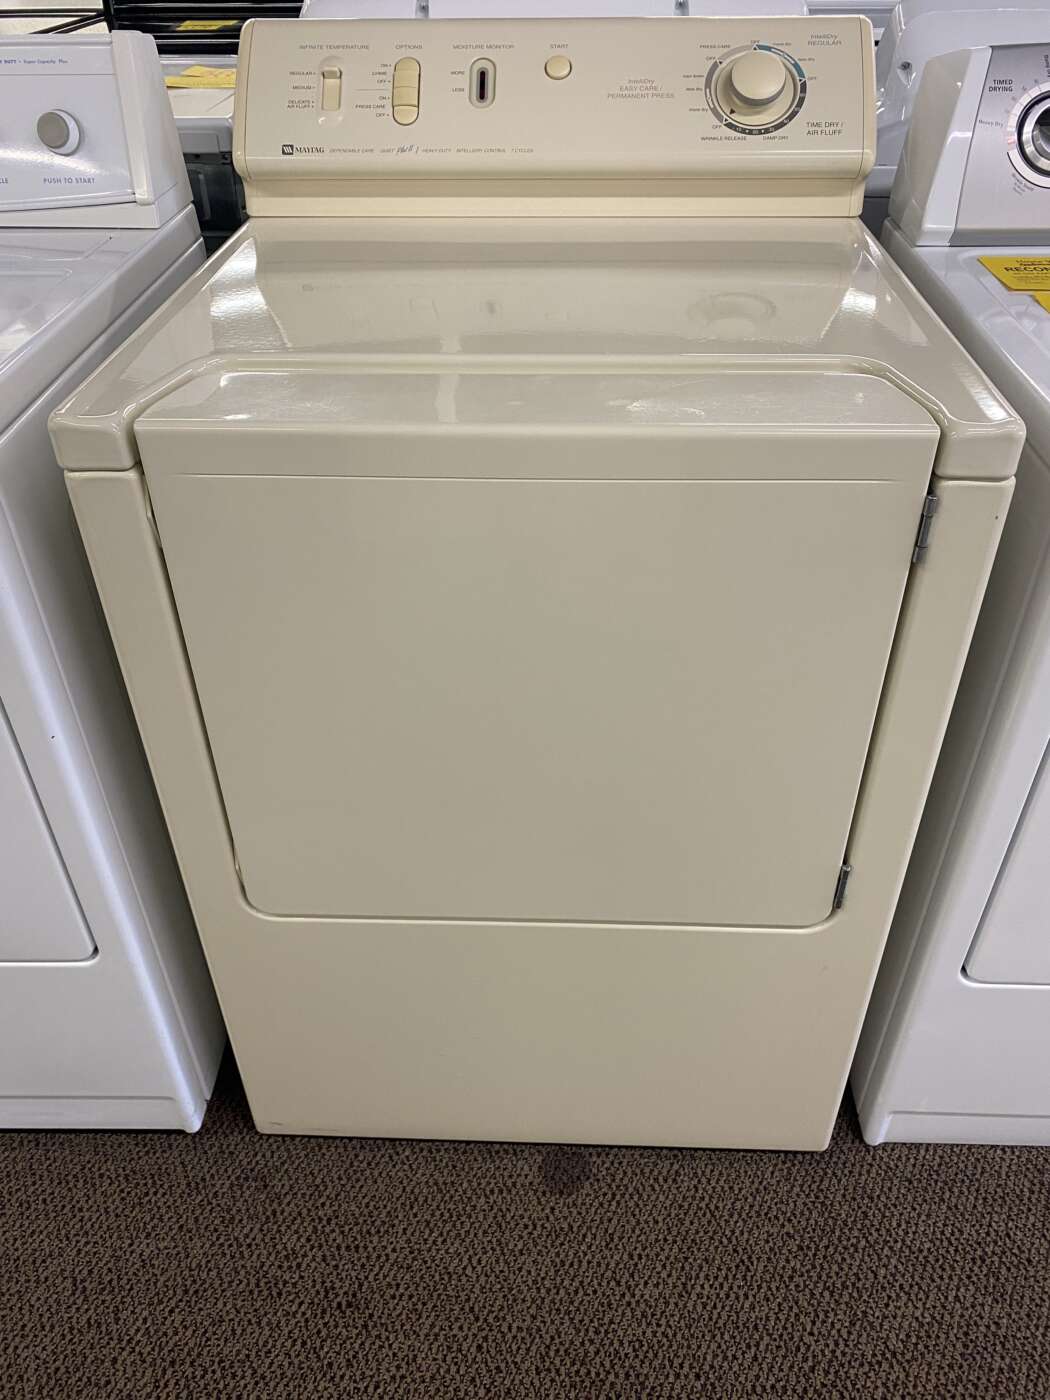 Reconditioned MAYTAG Electric Dryer ( Bisque )